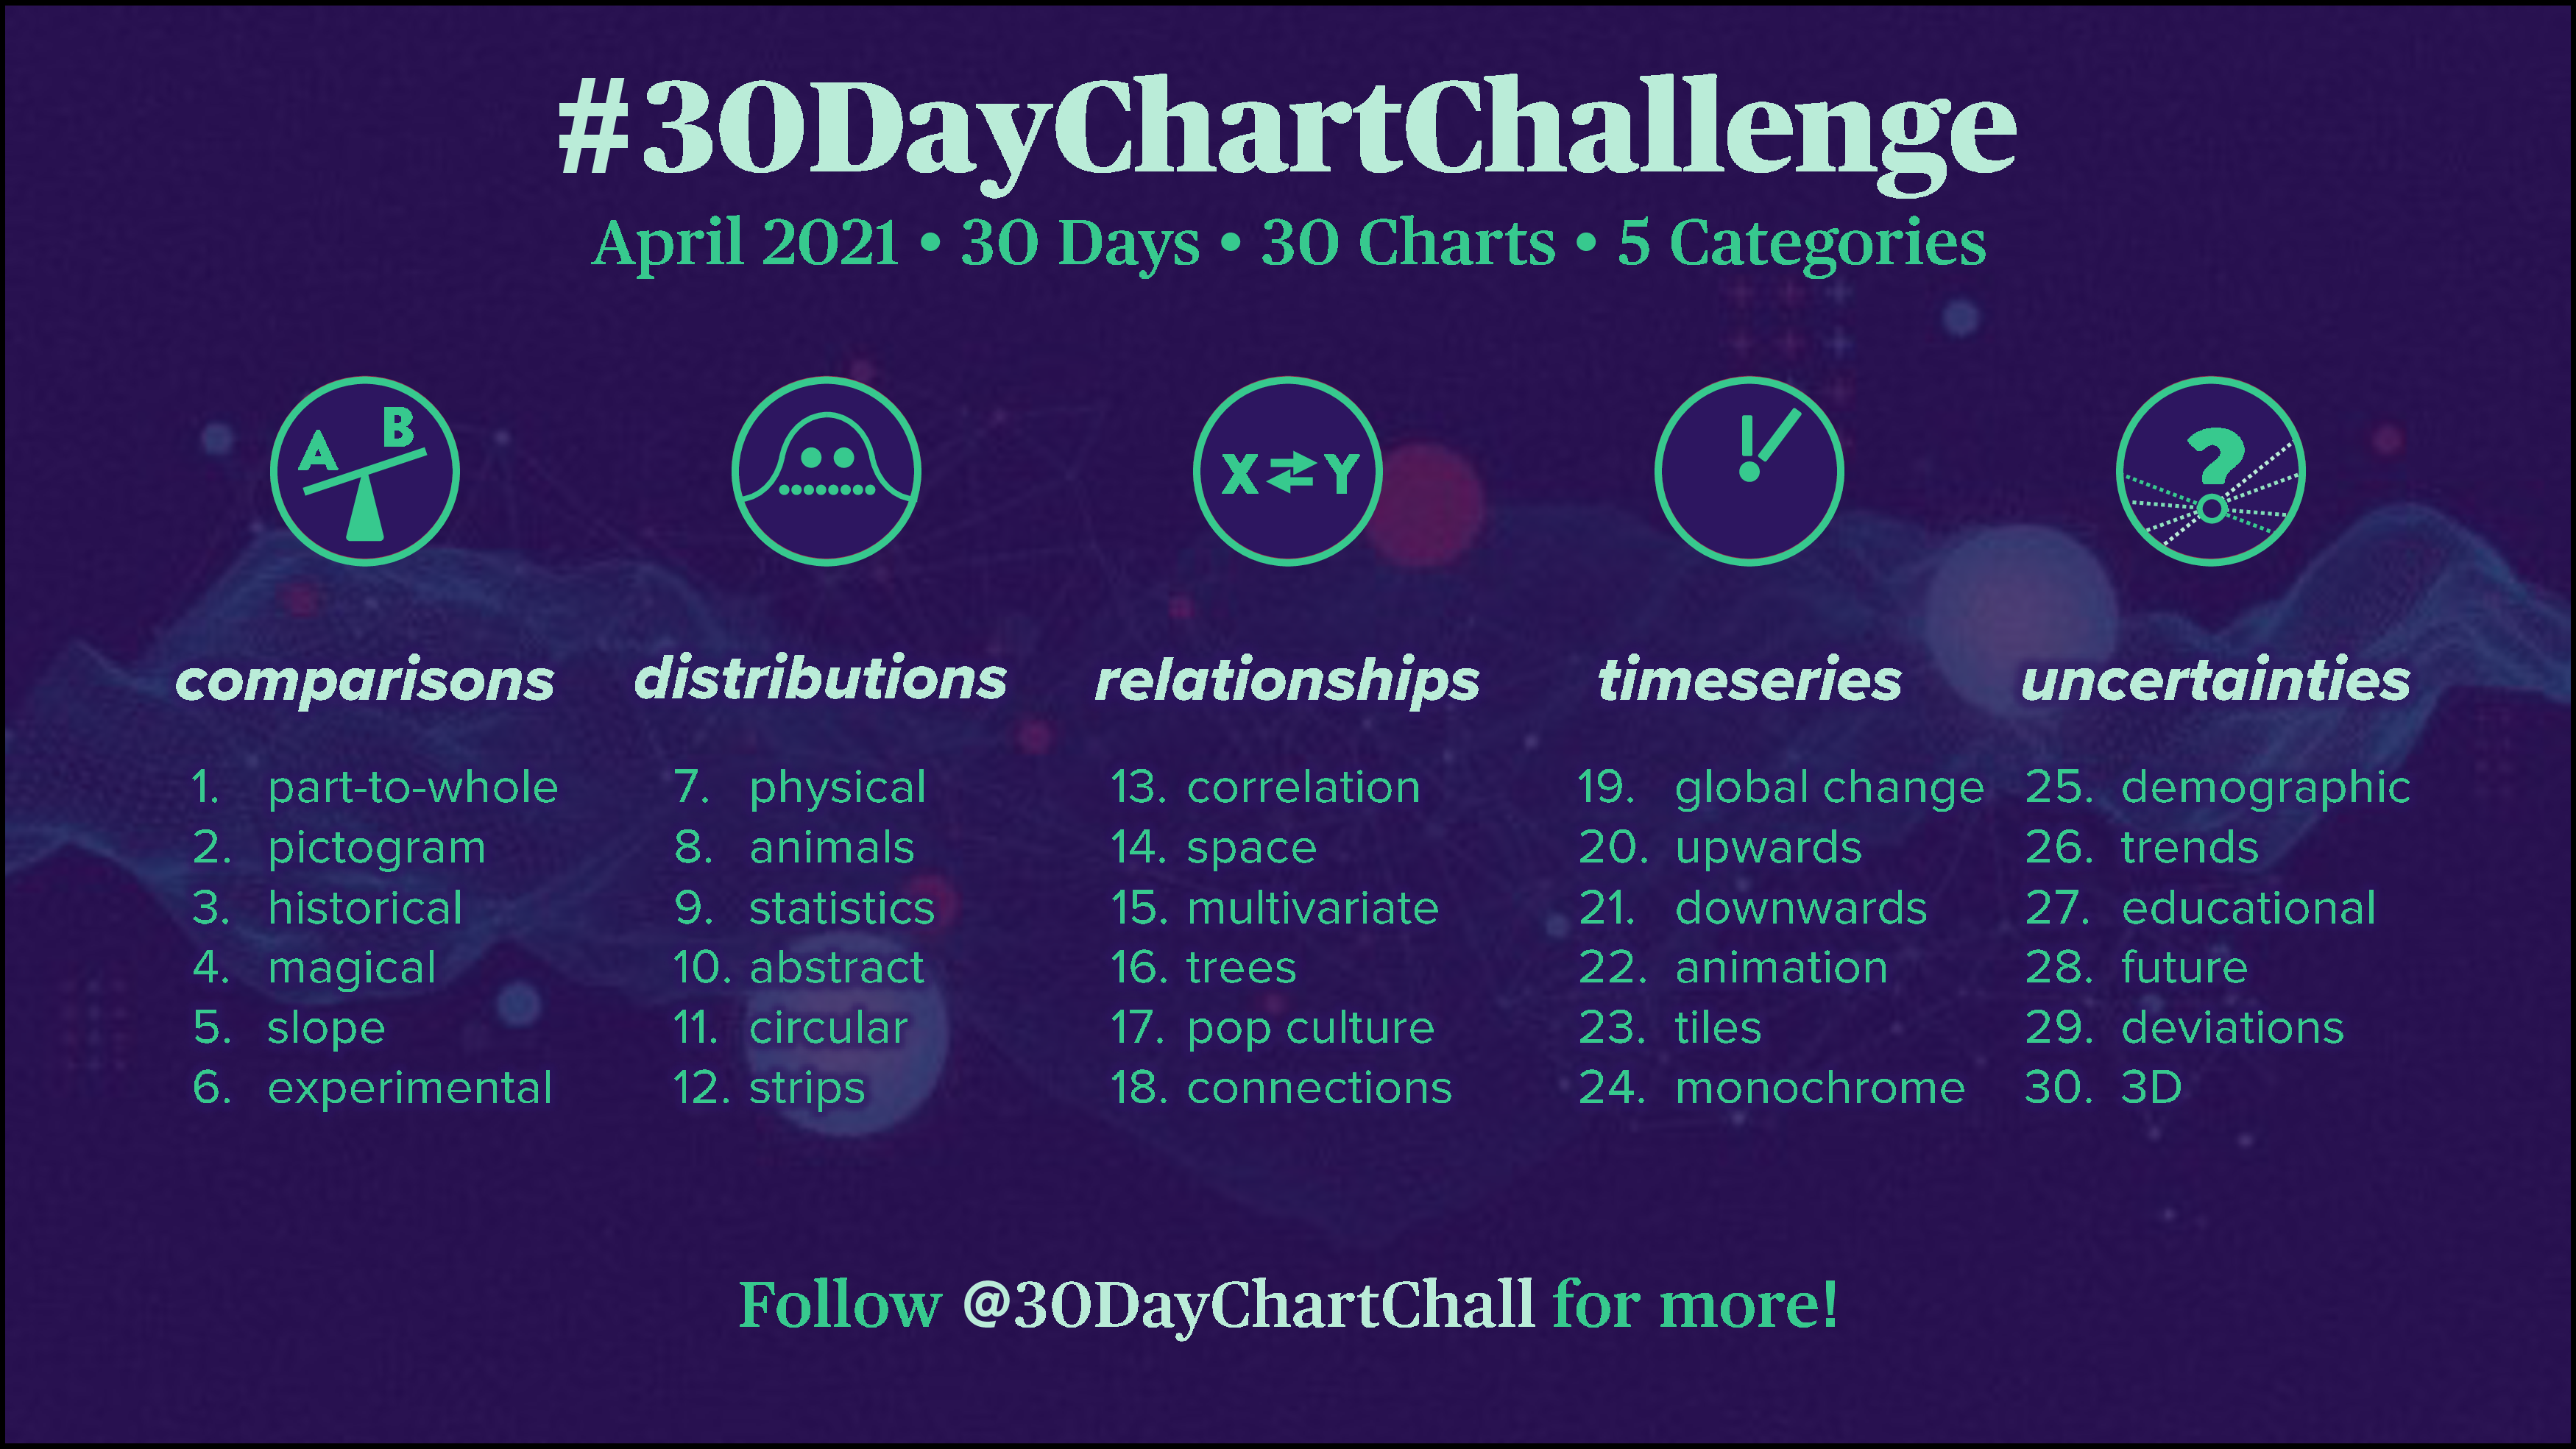 https://raw.githubusercontent.com/Z3tt/30DayChartChallenge_Collection2021/main/img/topics_ol.png